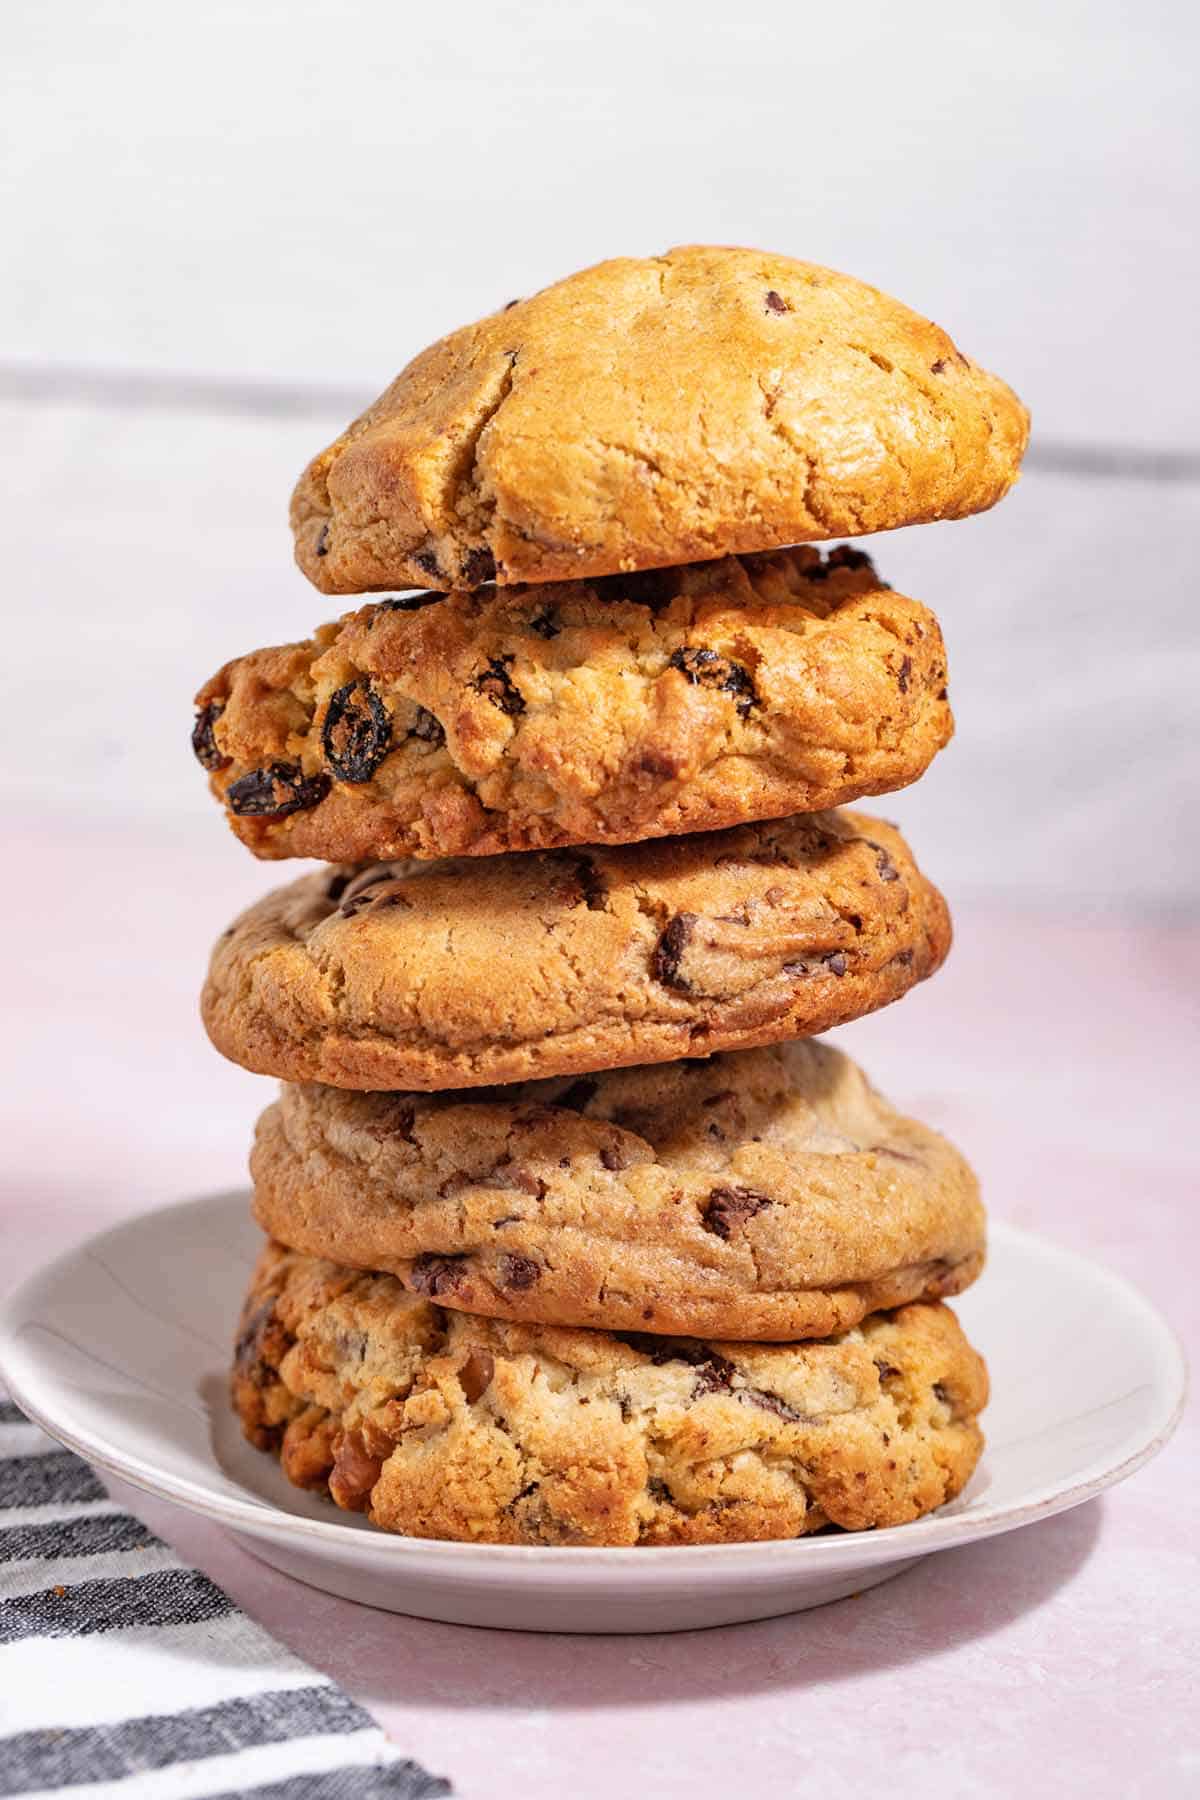 Tall stack of bakery-style cookies on a plate.